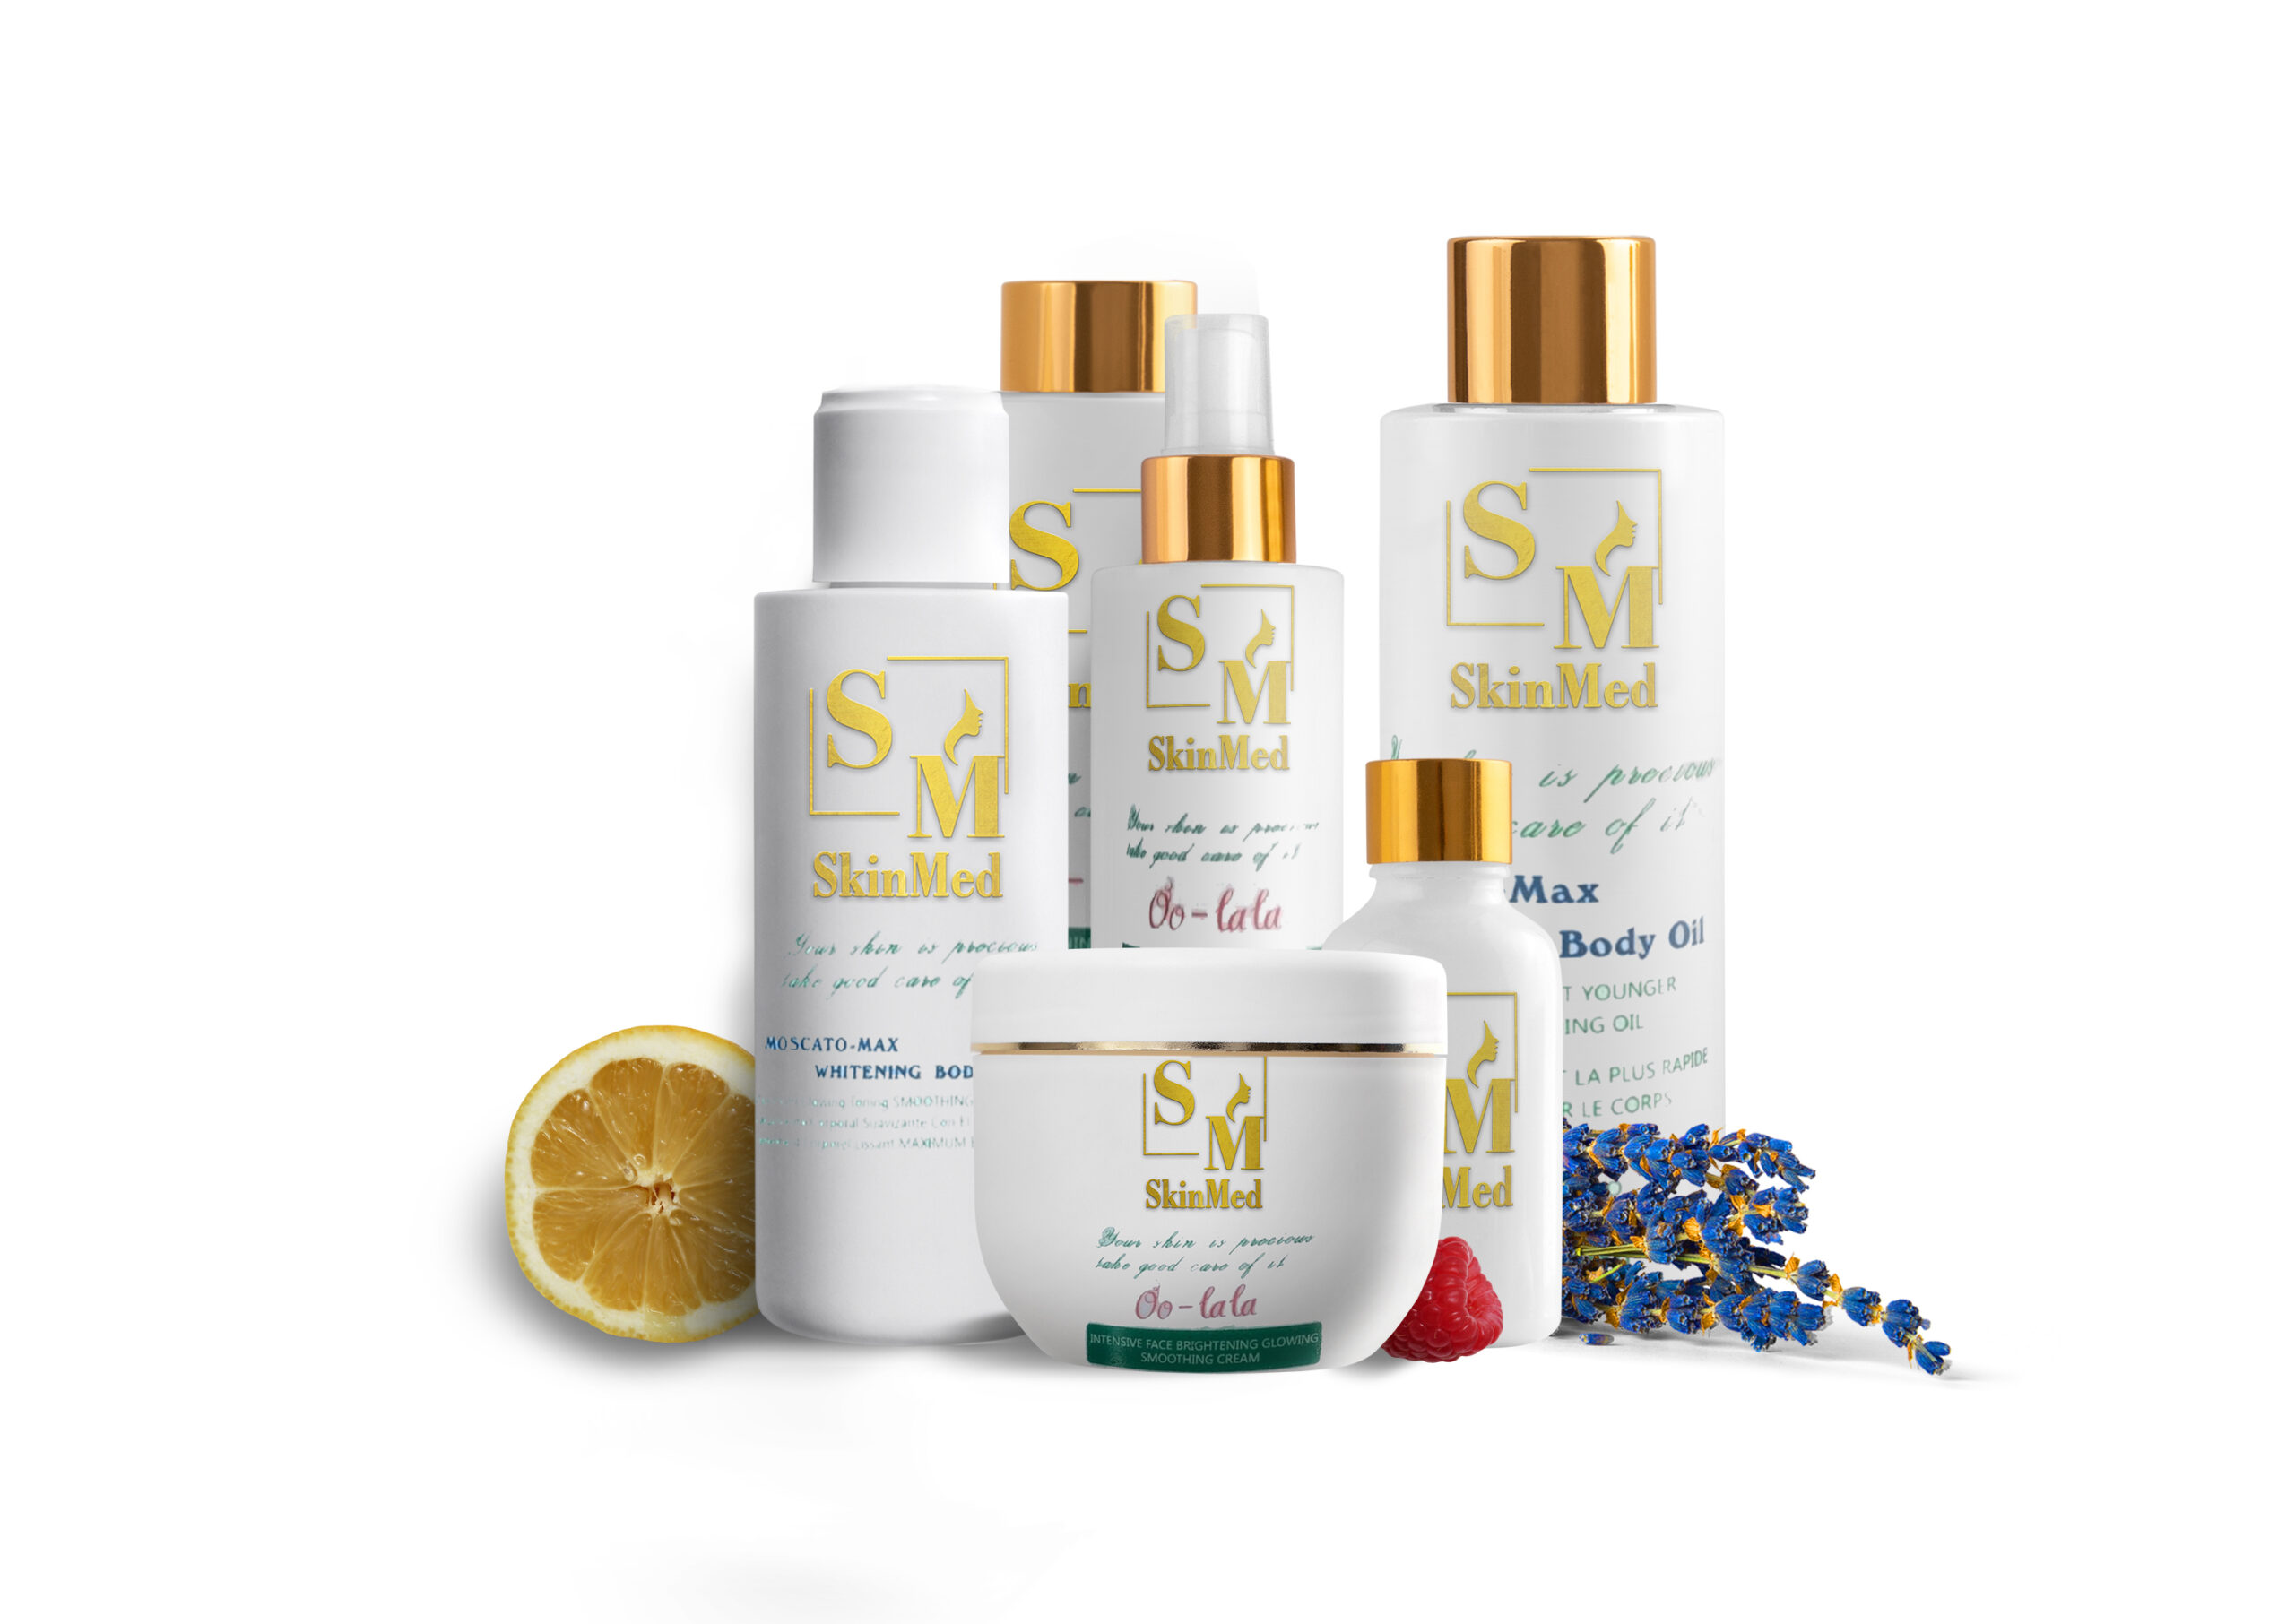 SKIN MED COLLECTIONS